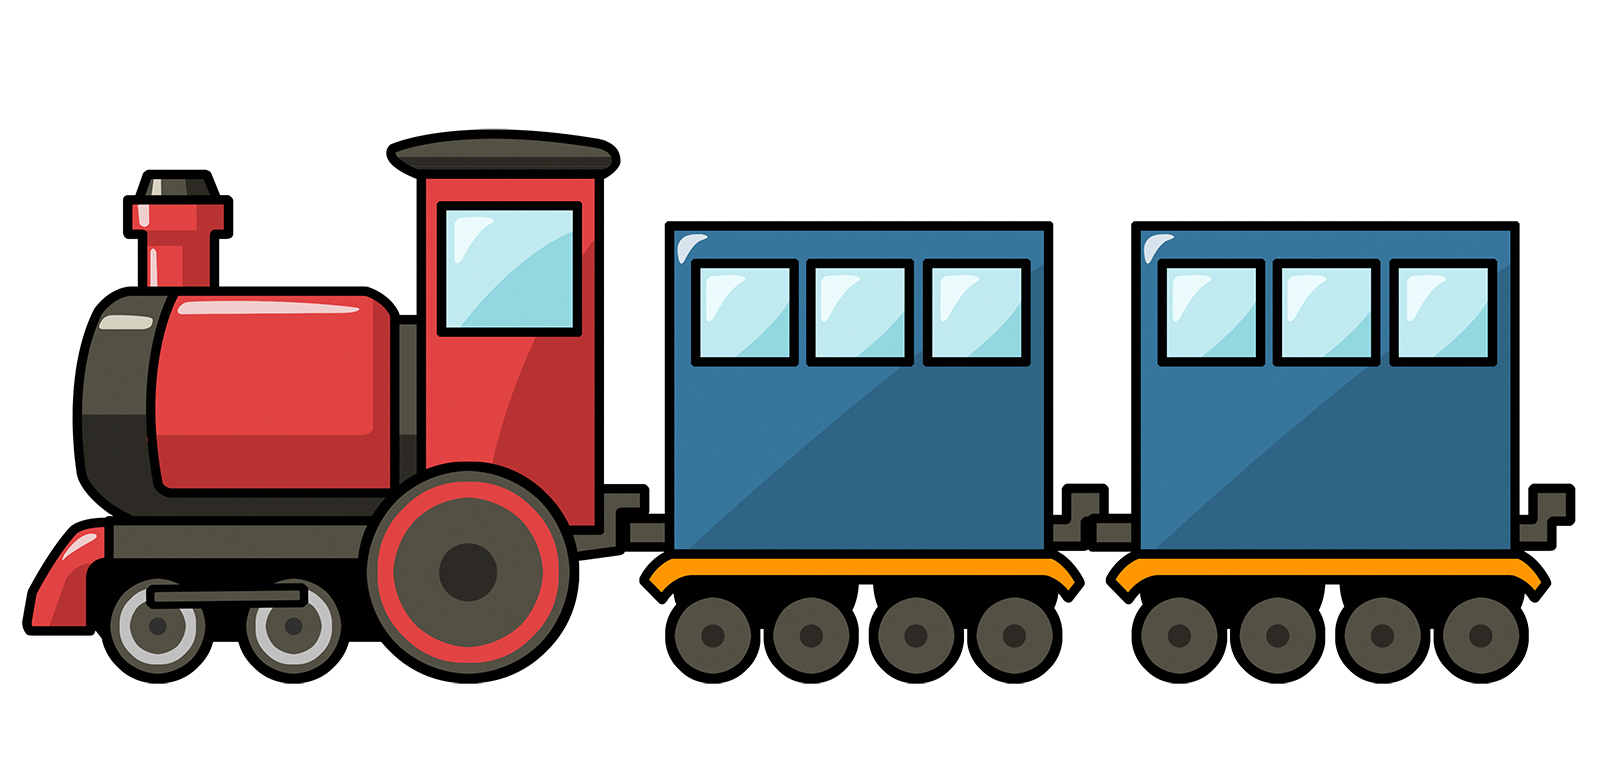 Toy Trains Clipart.